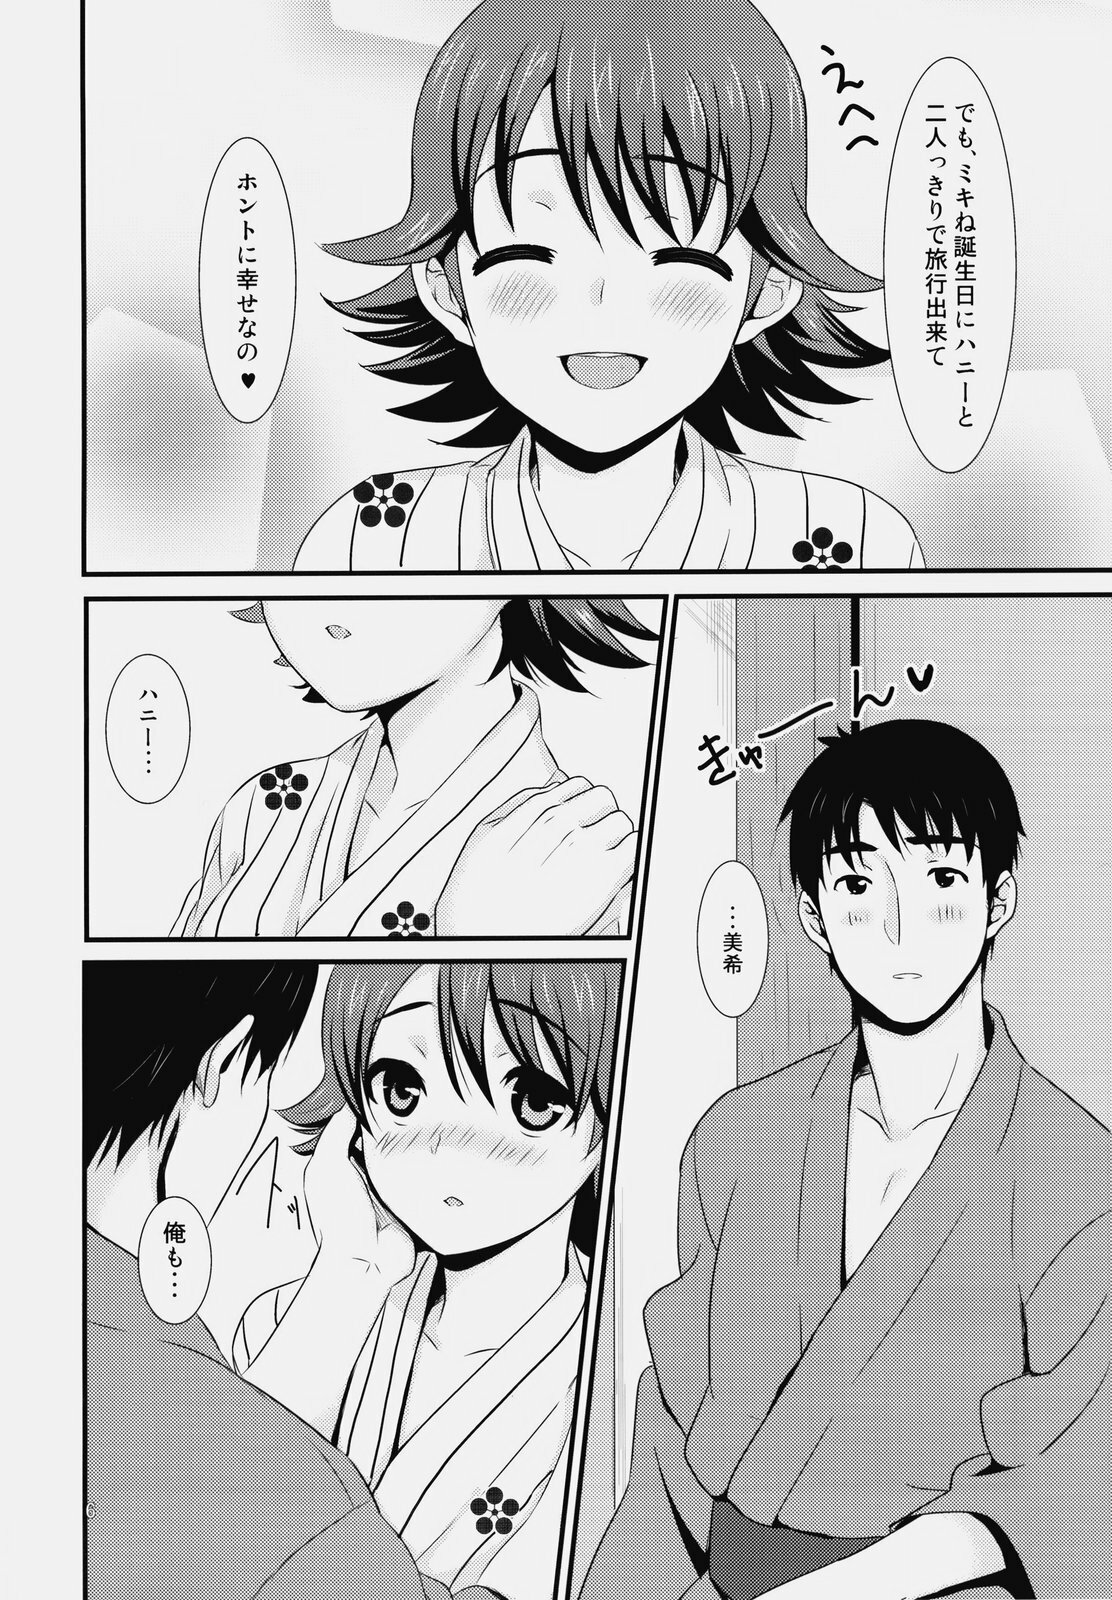 (Appeal For you!!) [Iorigumi (Tokita Alumi)] traveling (THE IDOLM@STER) page 5 full